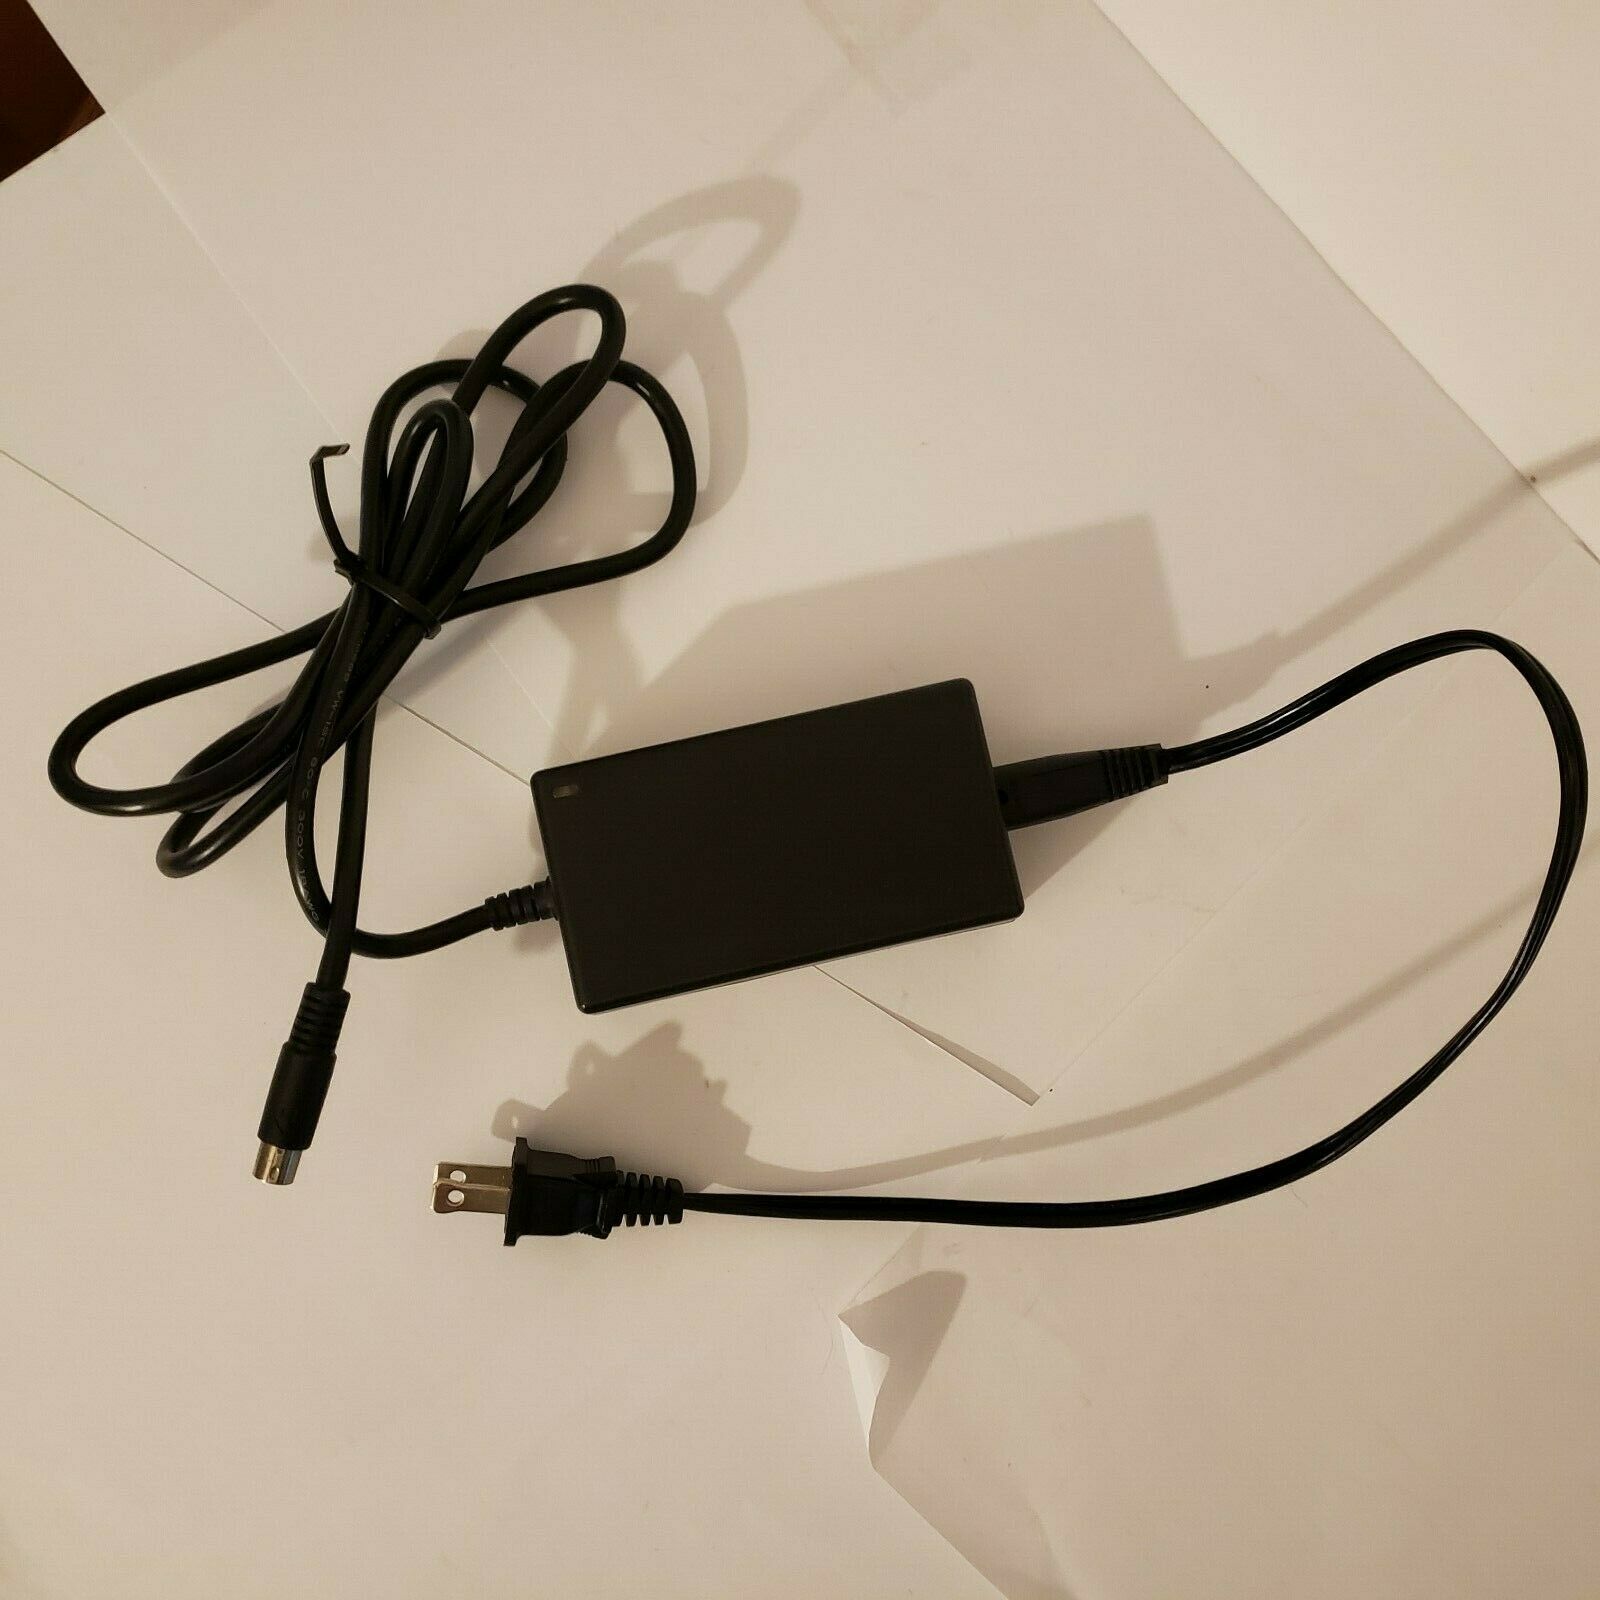 AC Adapter For HP Officejet H470 H470b H470wf H470wbt Mobile Printer Power Cord Compatible Brand: